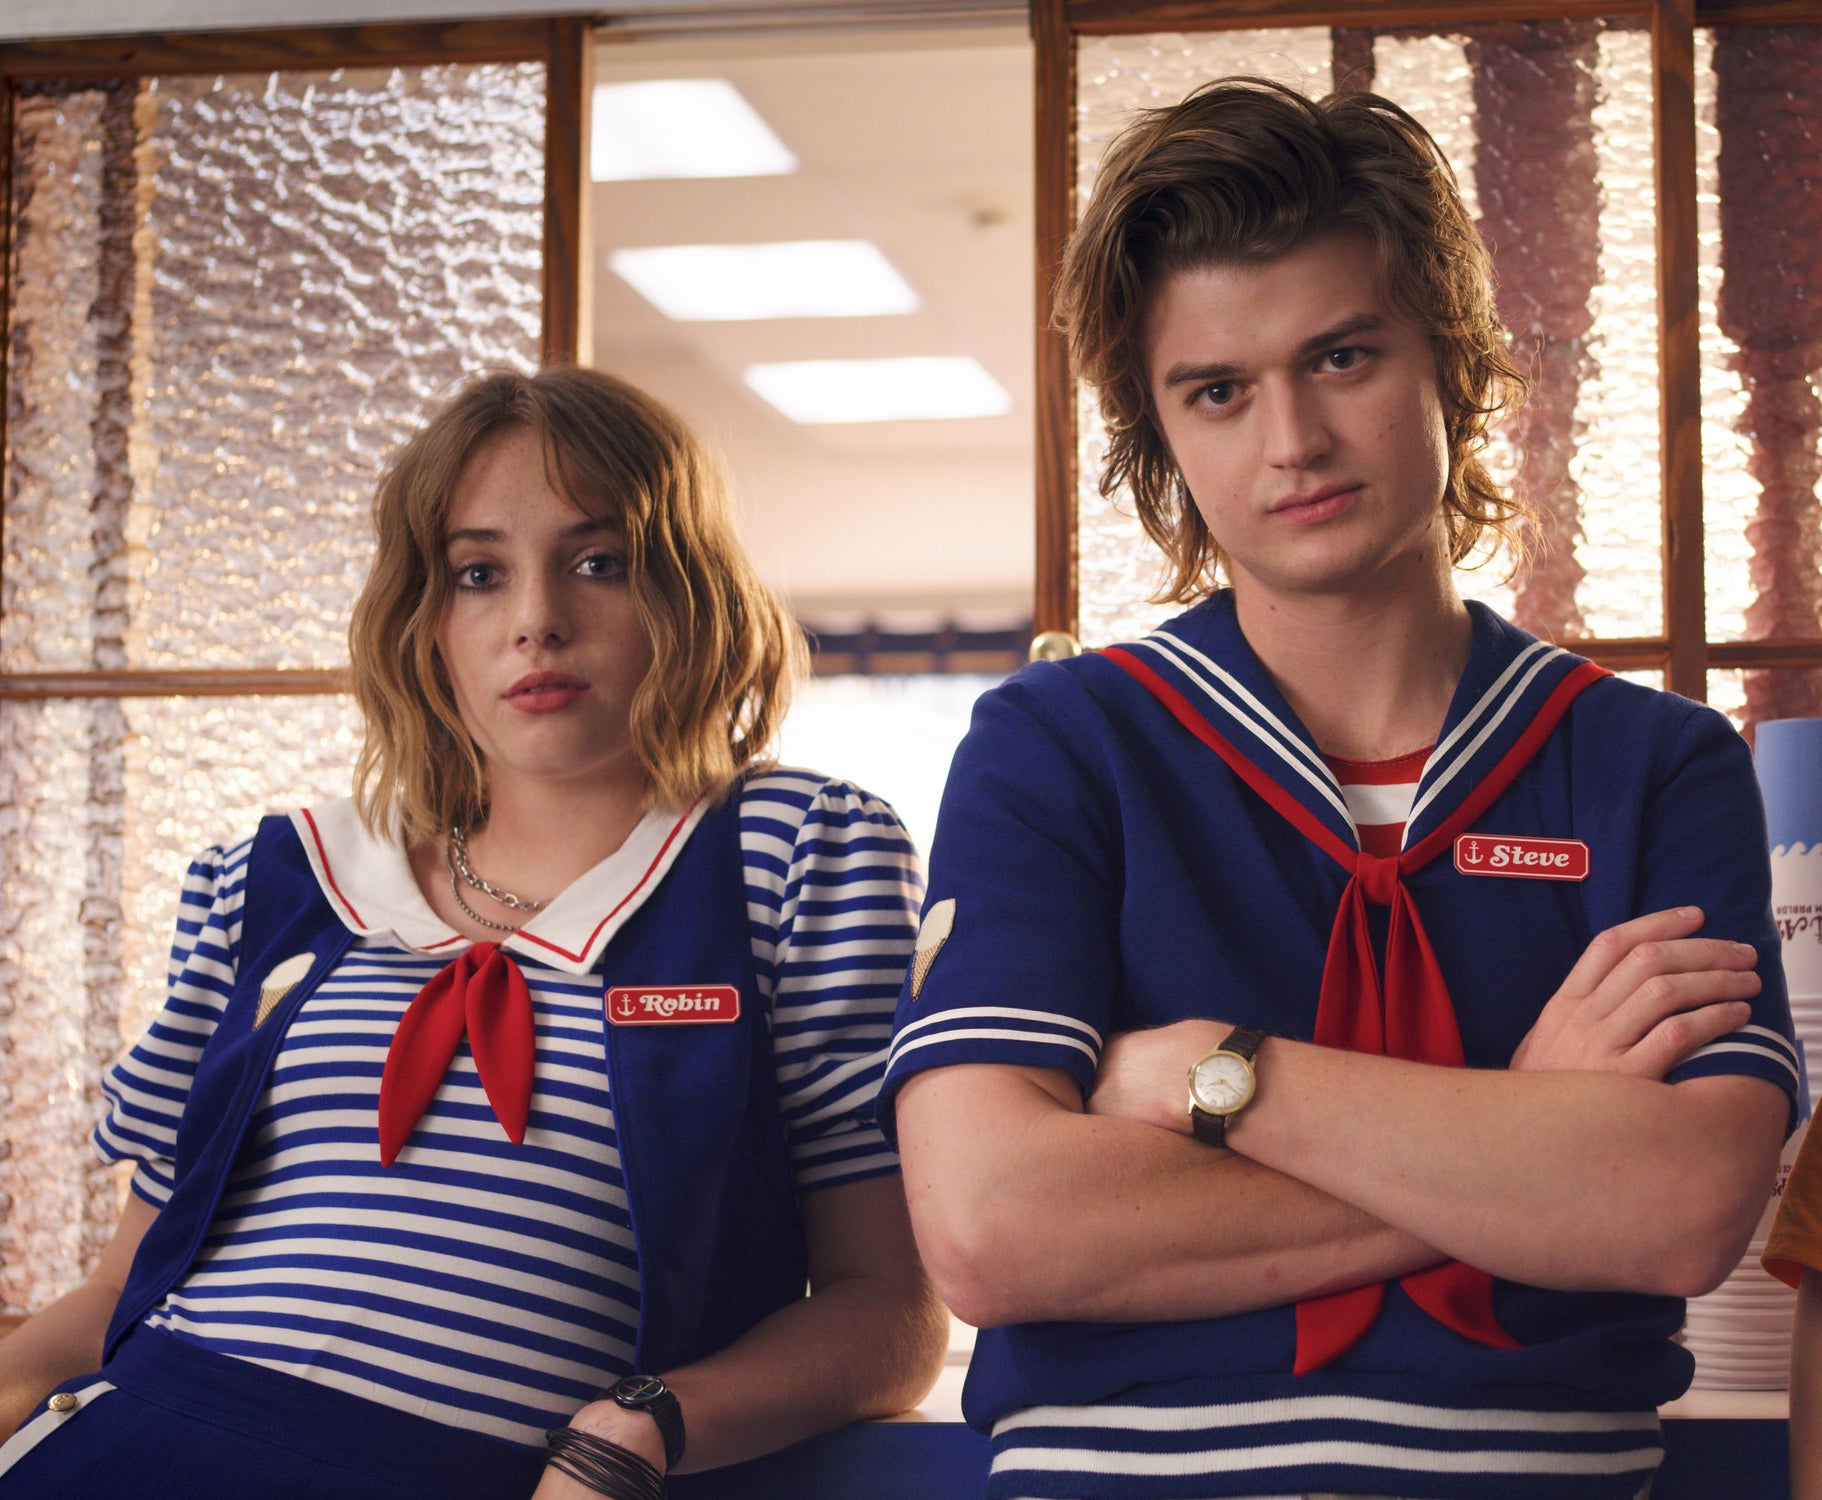 Robin and Steve in their Scoops Ahoy outfits